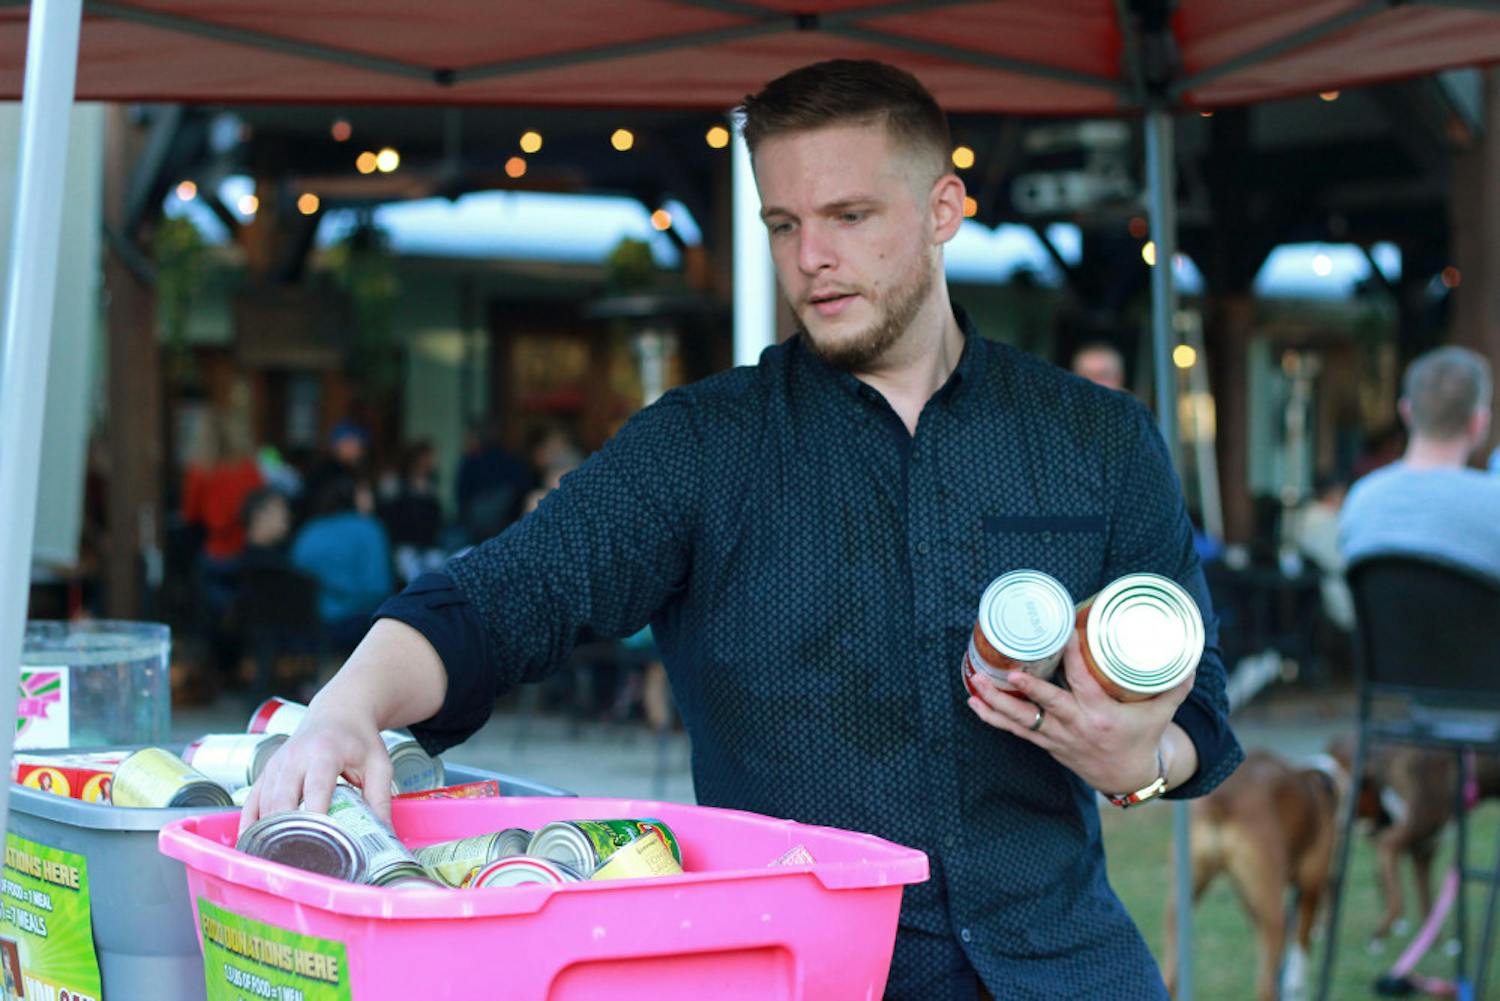 Fundraising organizer Andrew Poe, 28, consolidates donations of canned food Sunday at a food truck rally. Donated food will be given to Bread of the Mighty Food Bank.